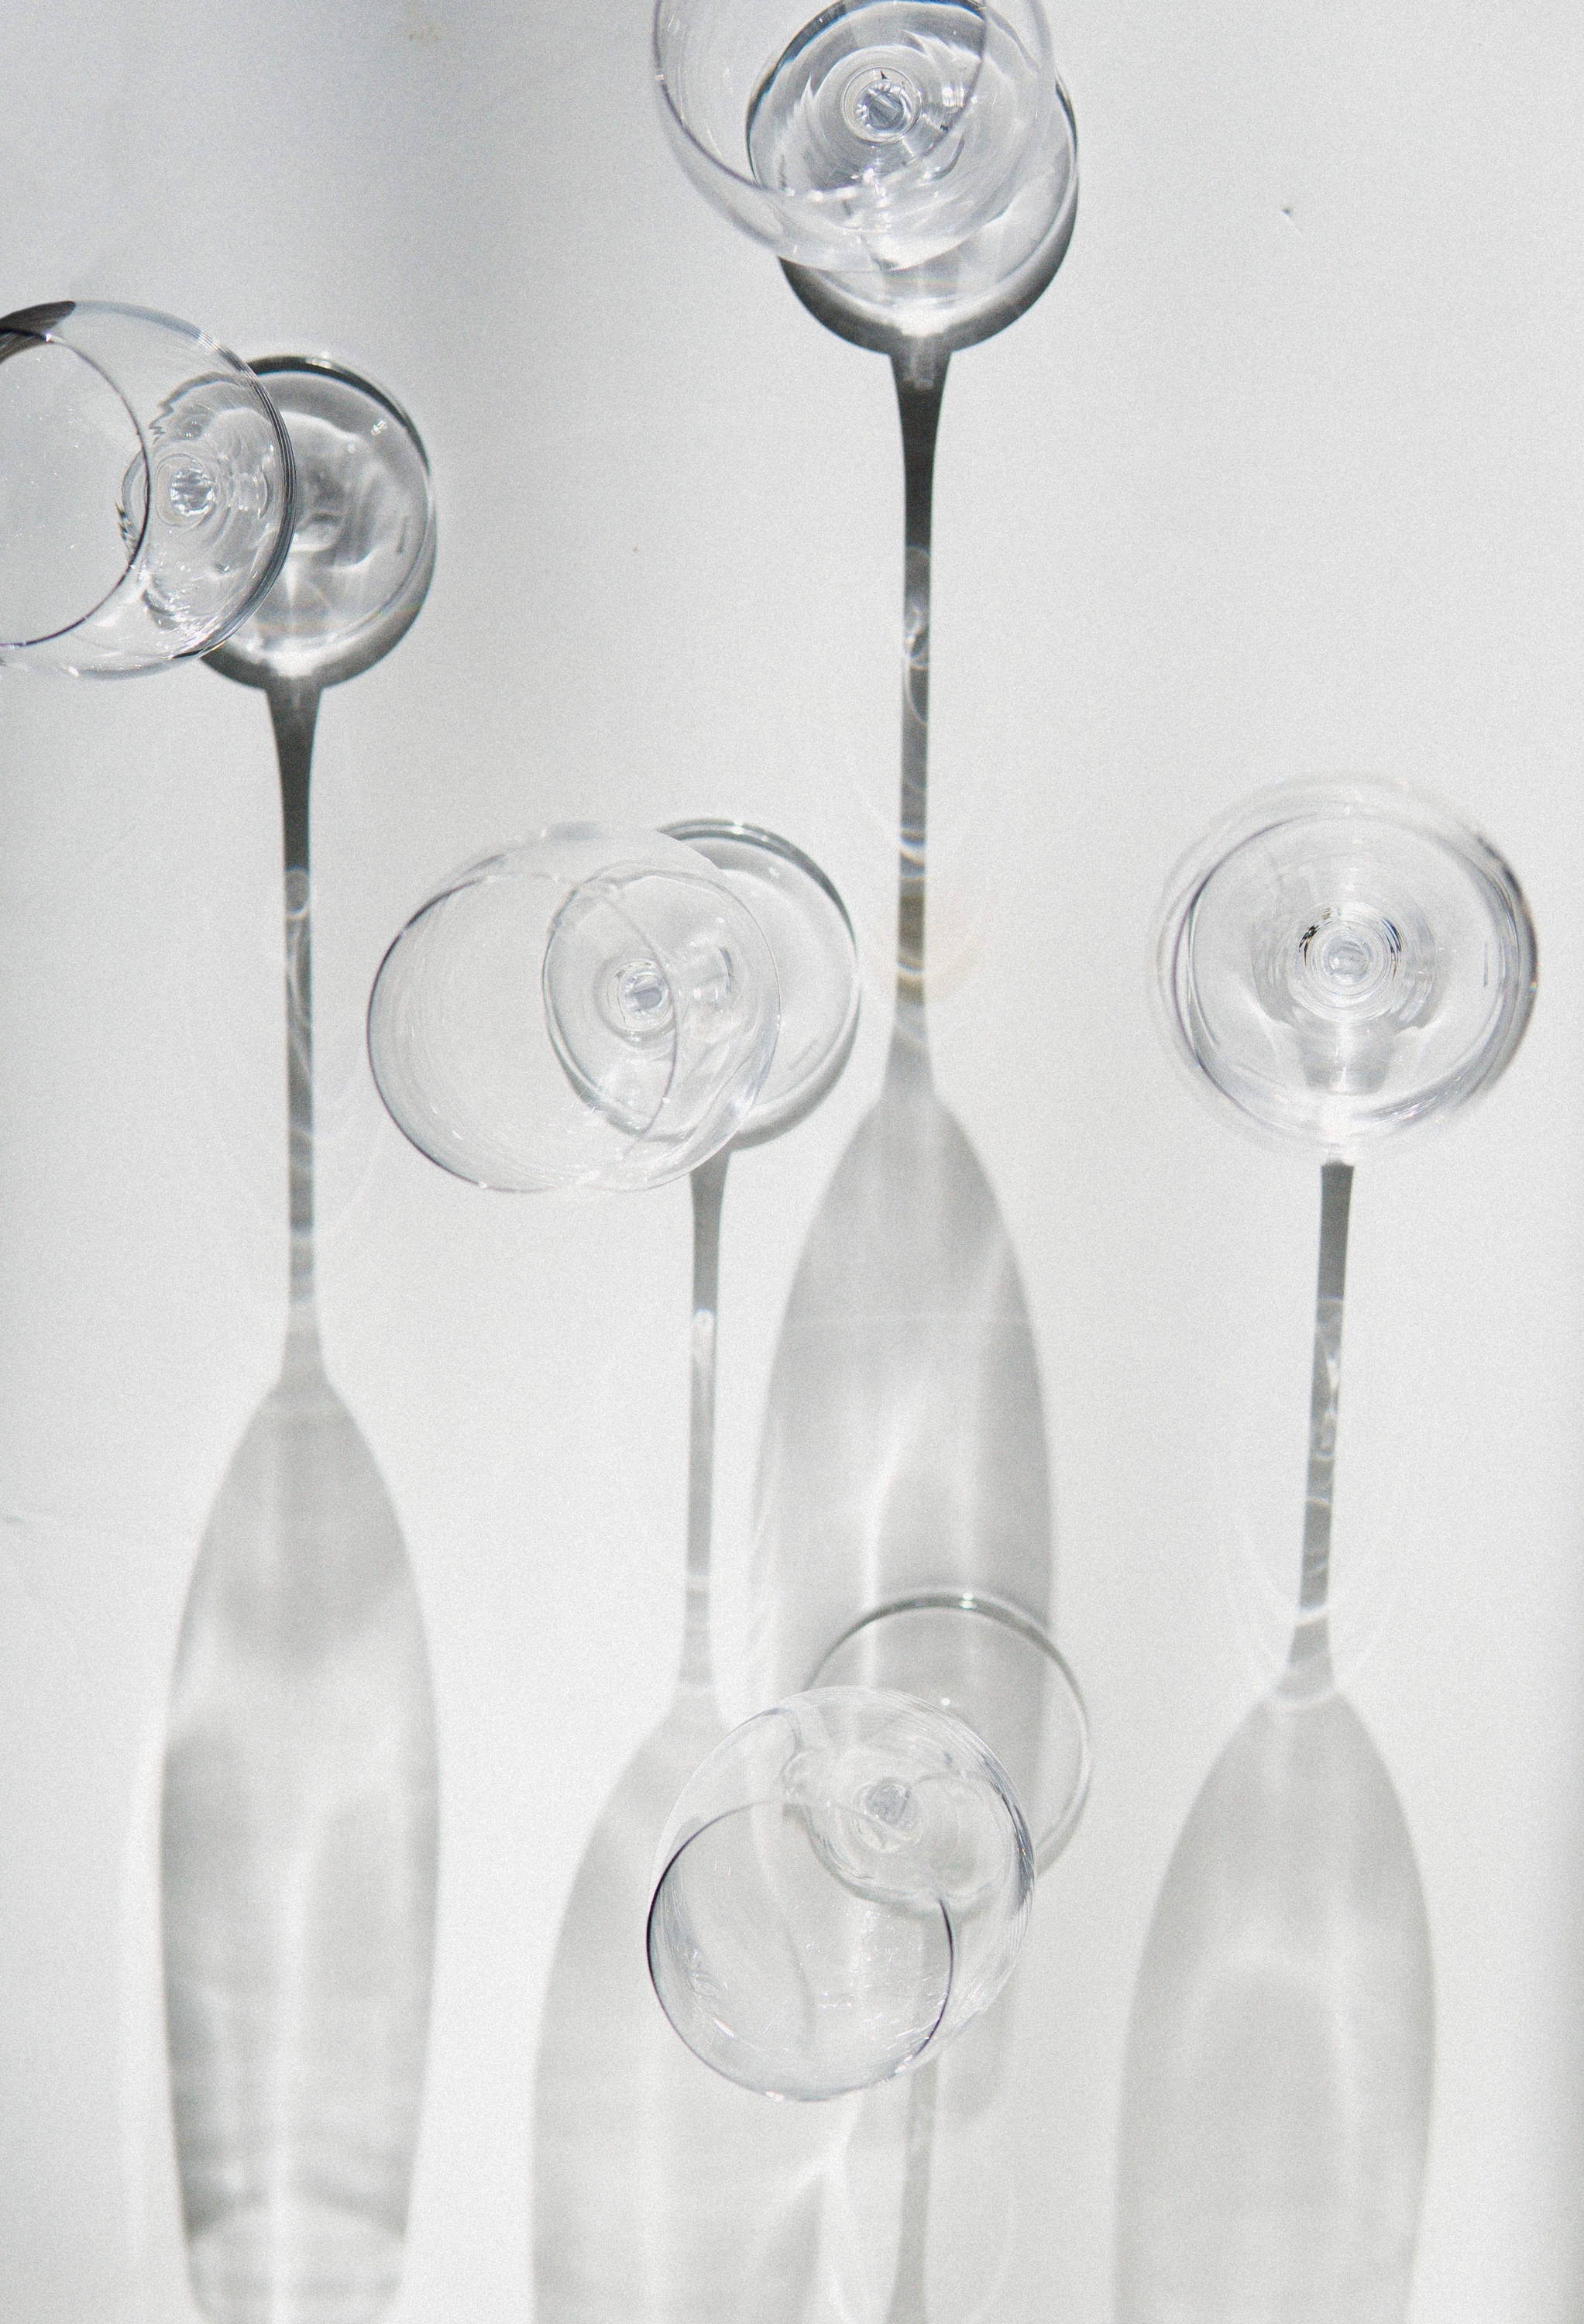 A Champagne glass filled with sparkling wine highlighting the slender shape to preserve bubbles.